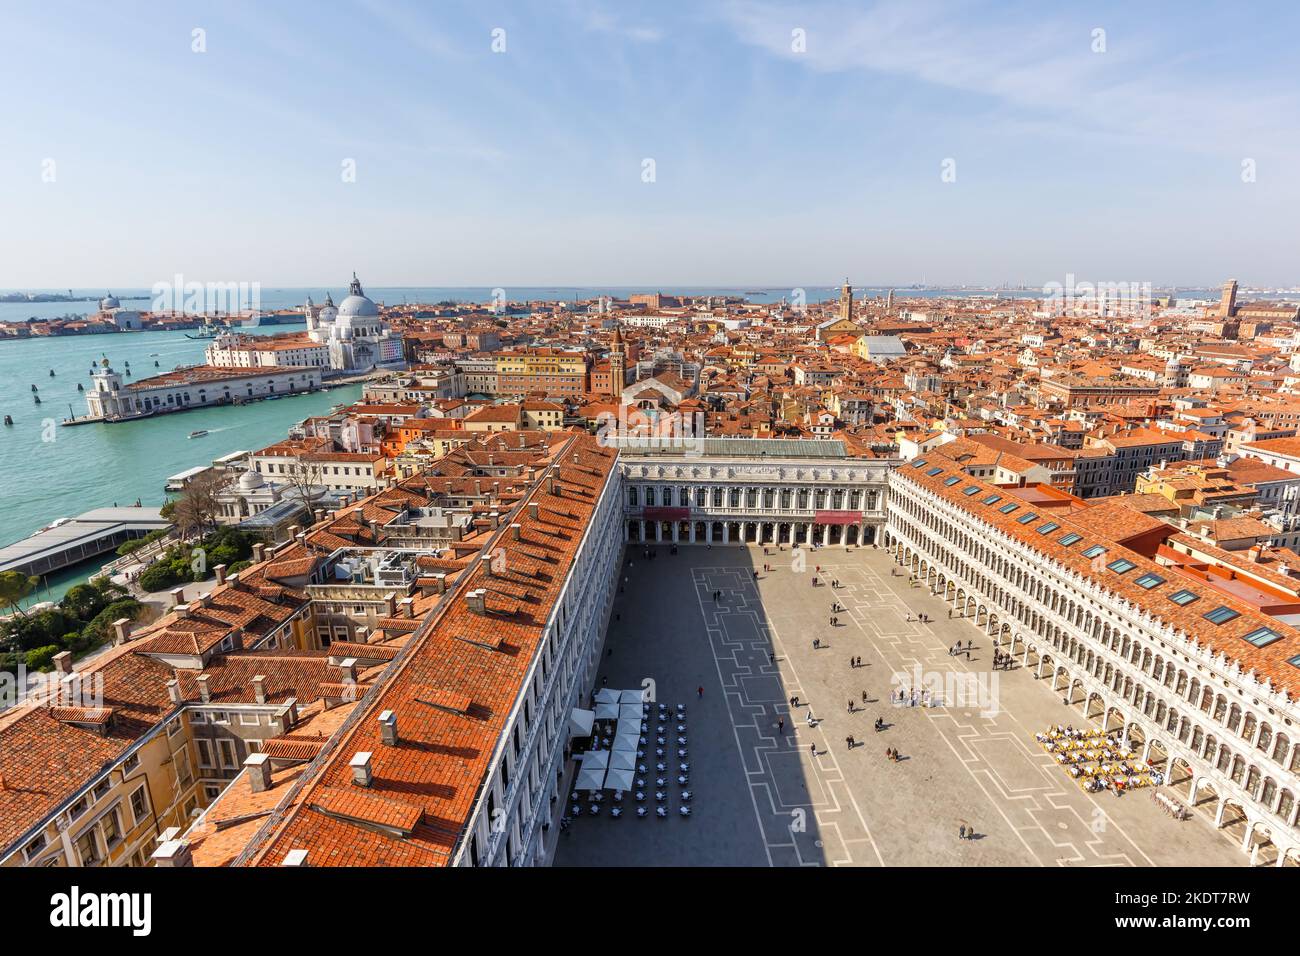 Venice, Italy - March 21, 2022: St. Mark's Square Piazza San Marco From Above Overview Vacation Travel City In Venice, Italy. Stock Photo